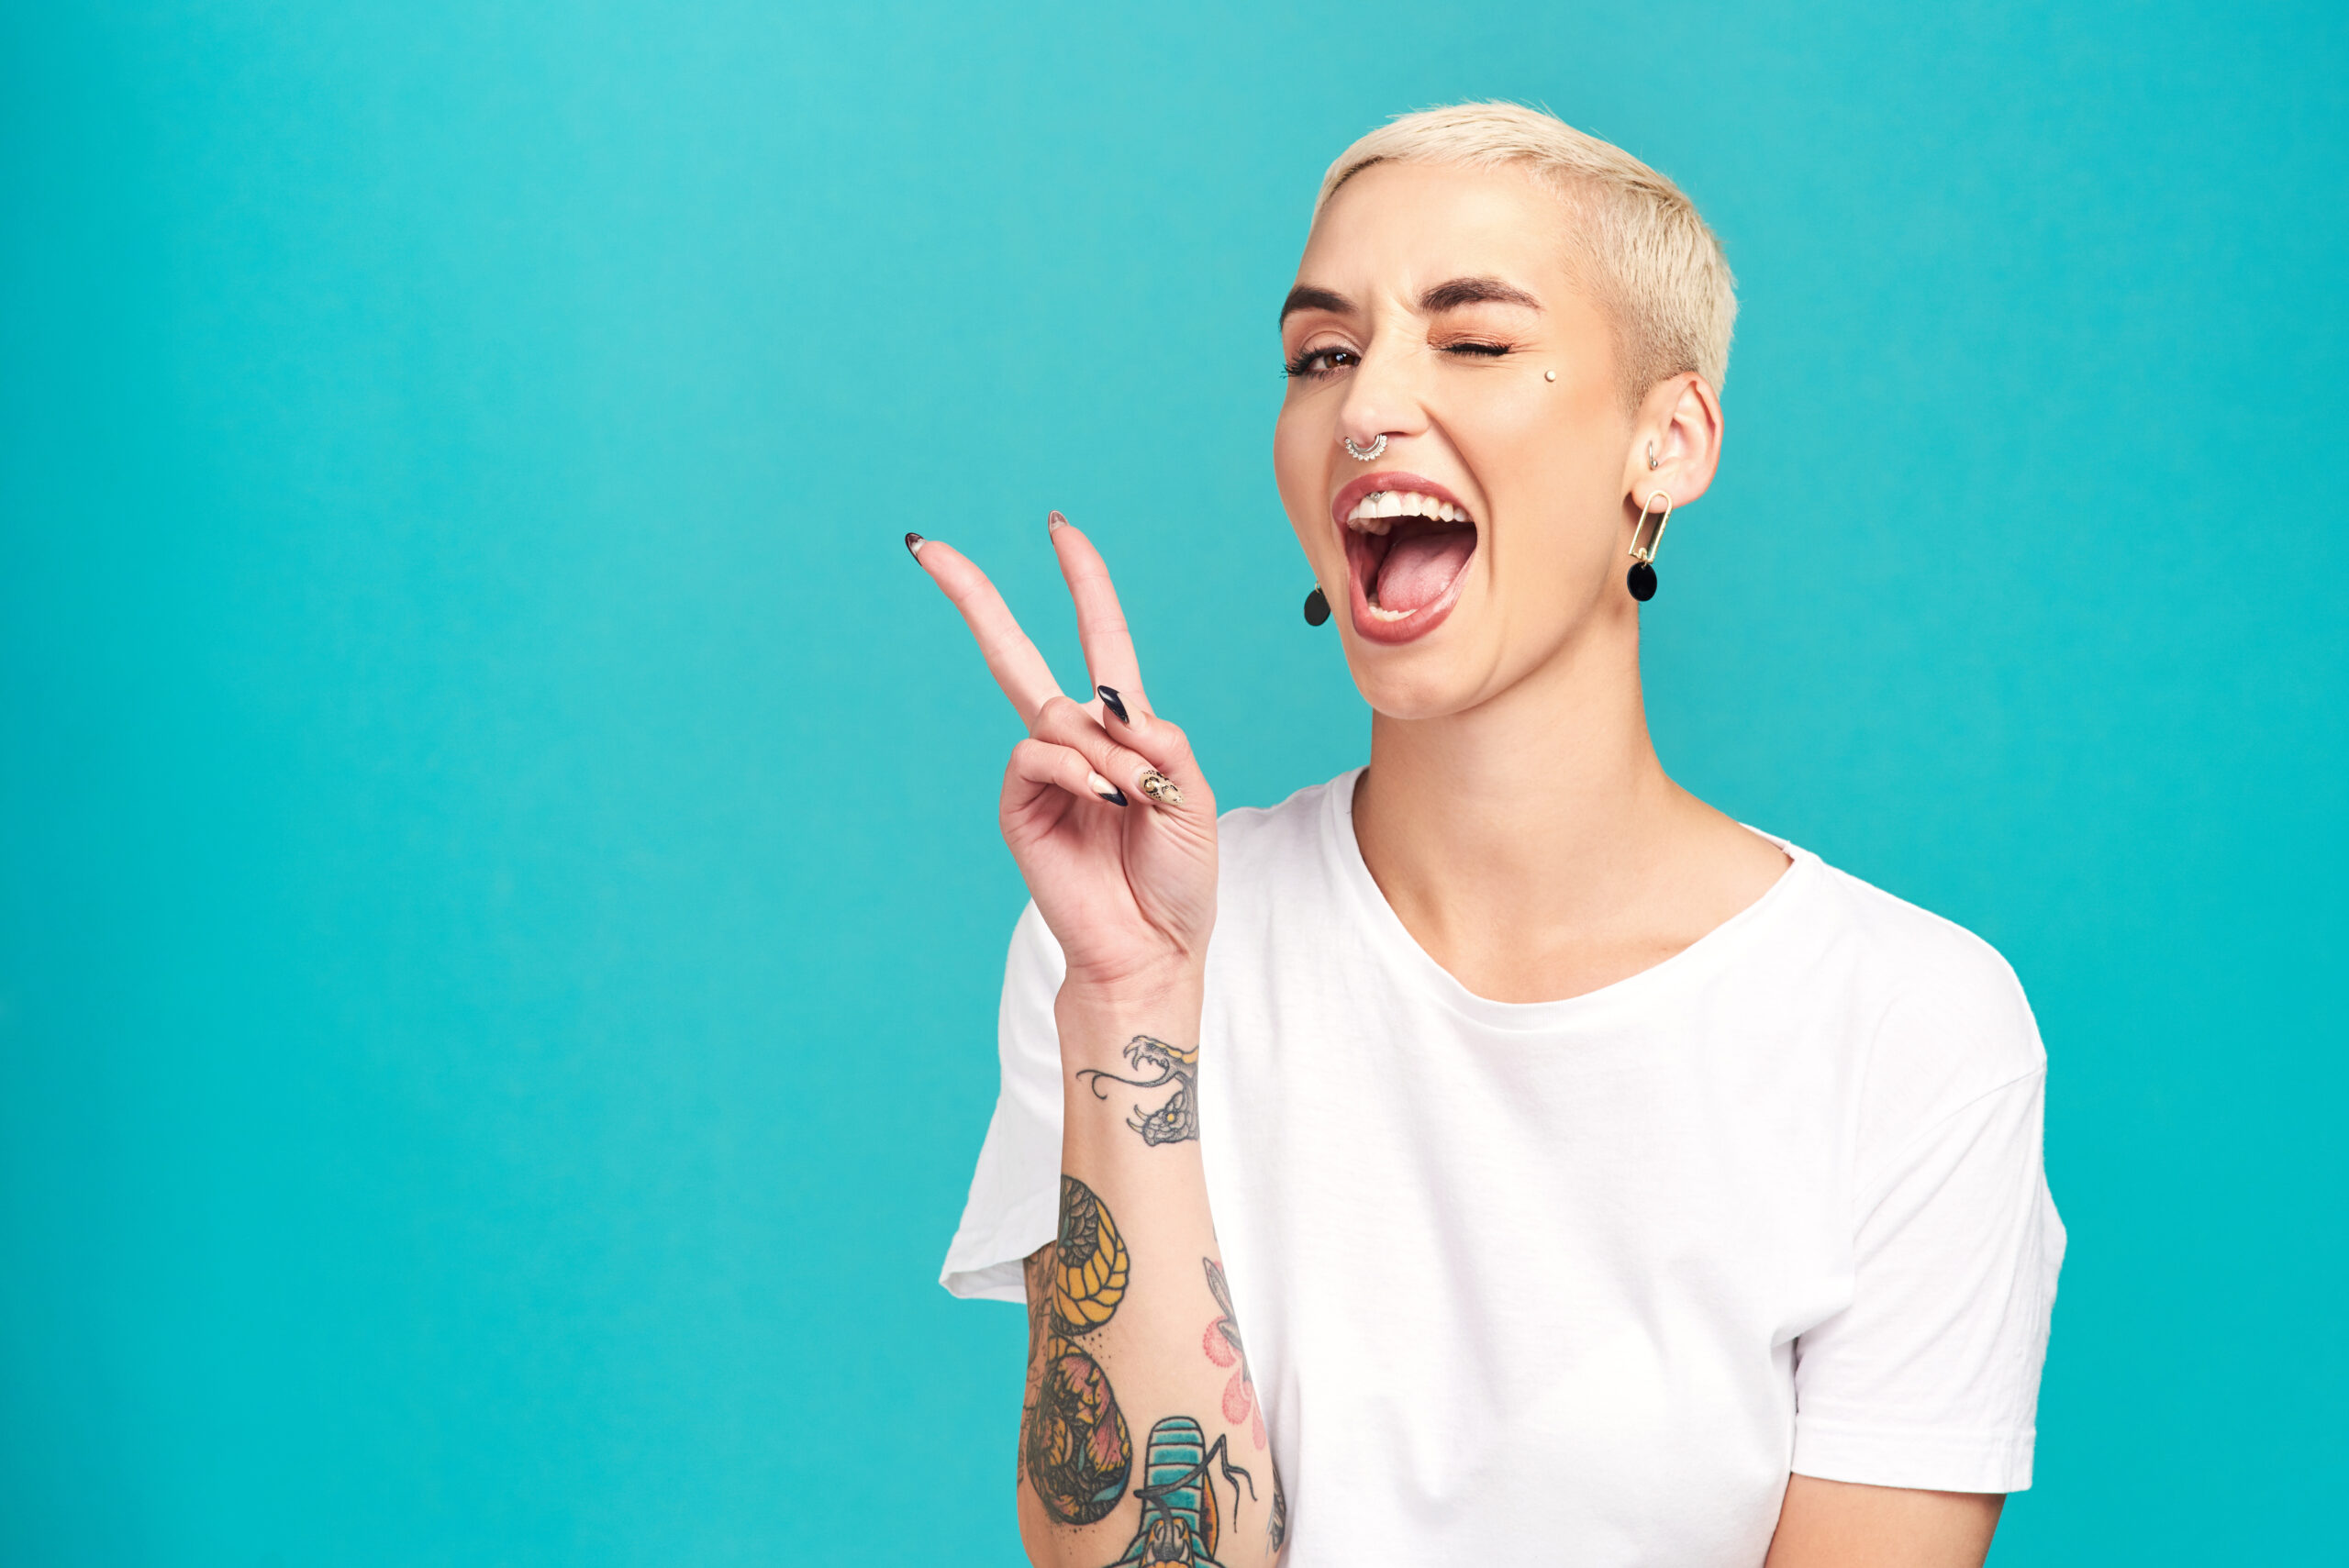 A woman with tattoos making a peace sign on a blue background.